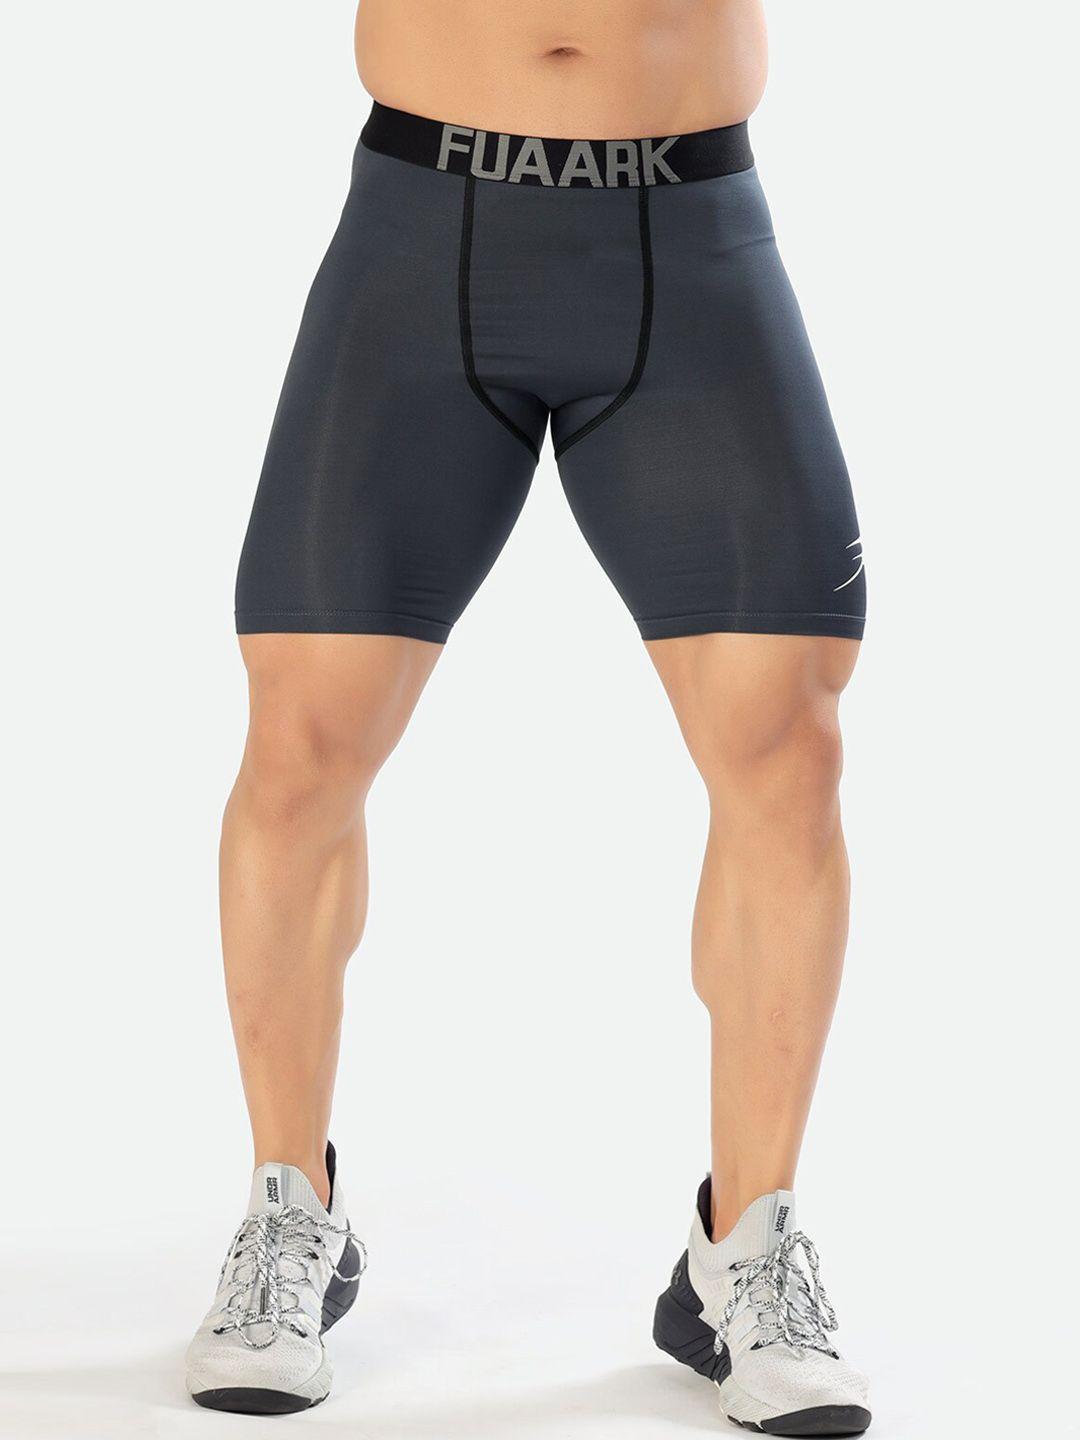 fuaark men grey skinny fit high-rise training or gym sports shorts with antimicrobial technology